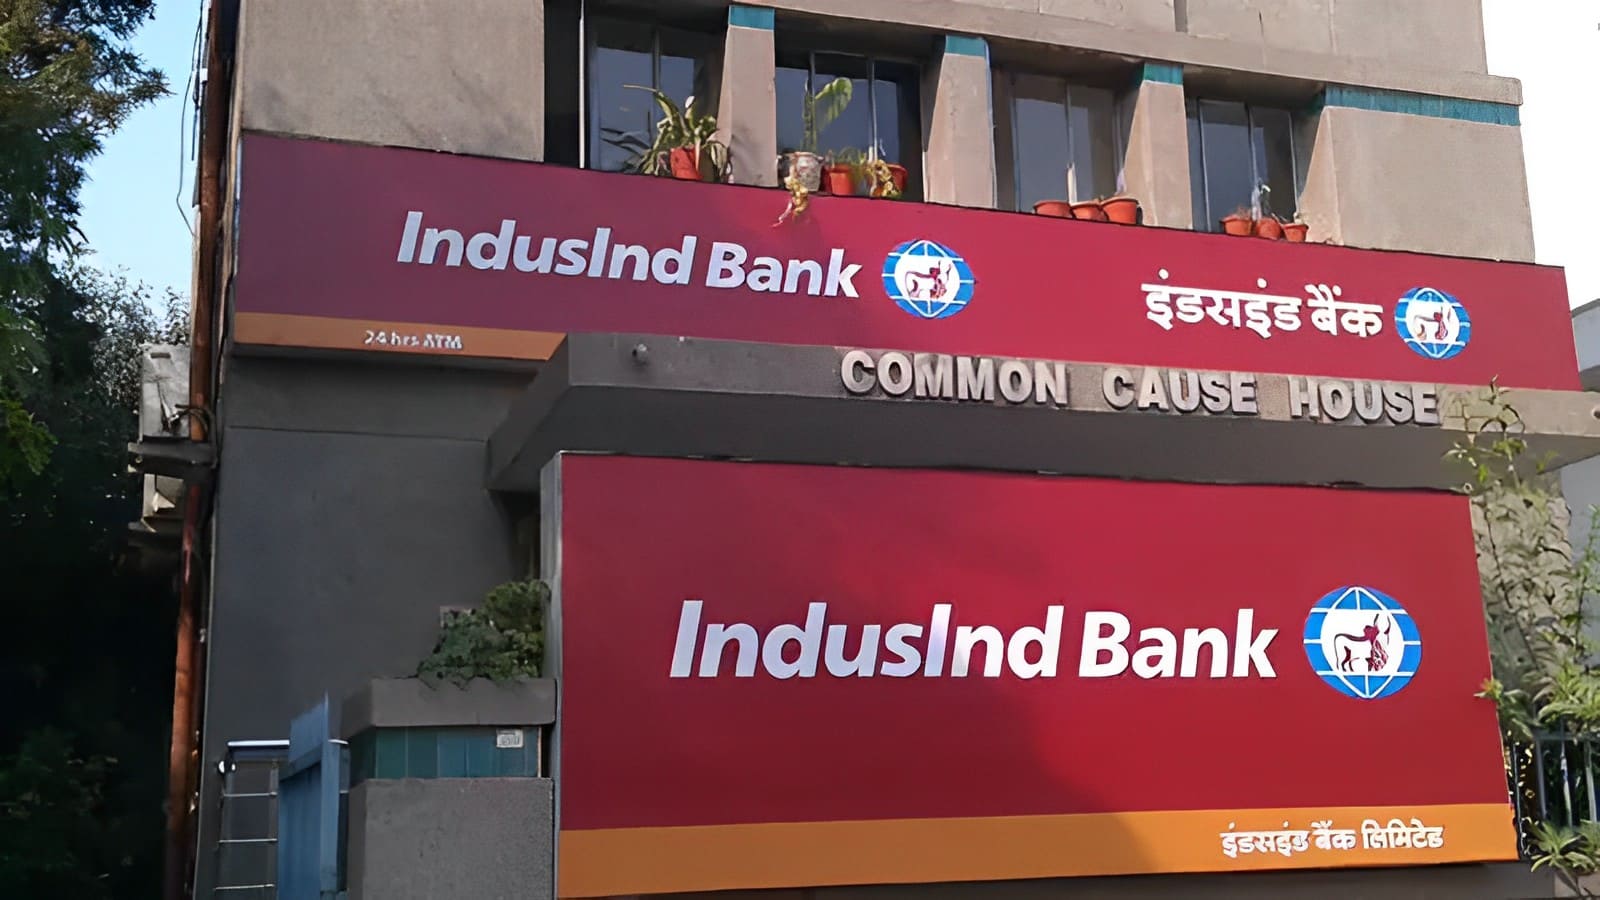 IndusInd Bank launches digital app, targets 10M customers in 3 years